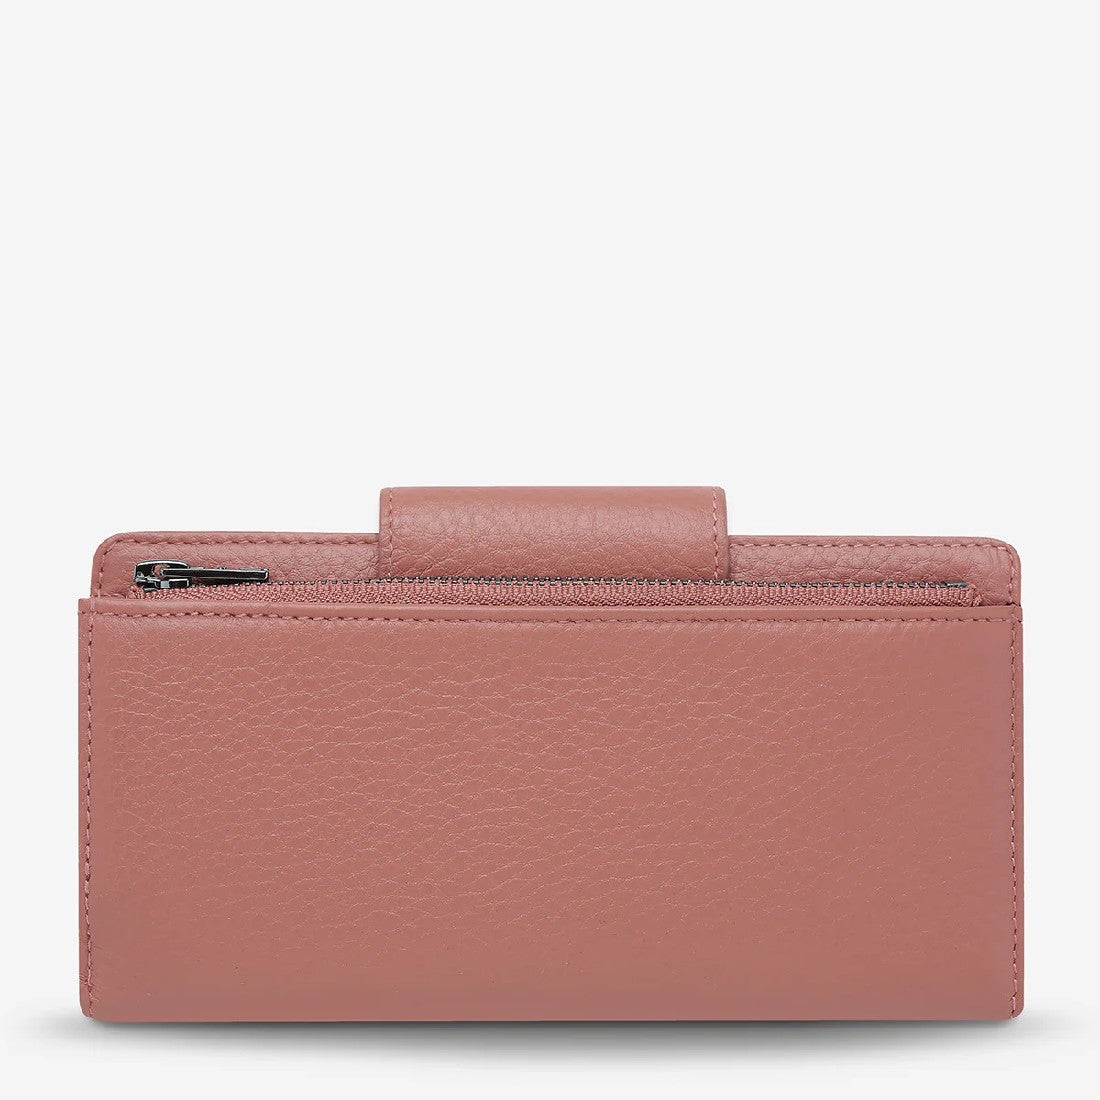 Status Anxiety Ruins Wallet - Little Extras Lifestyle Boutique